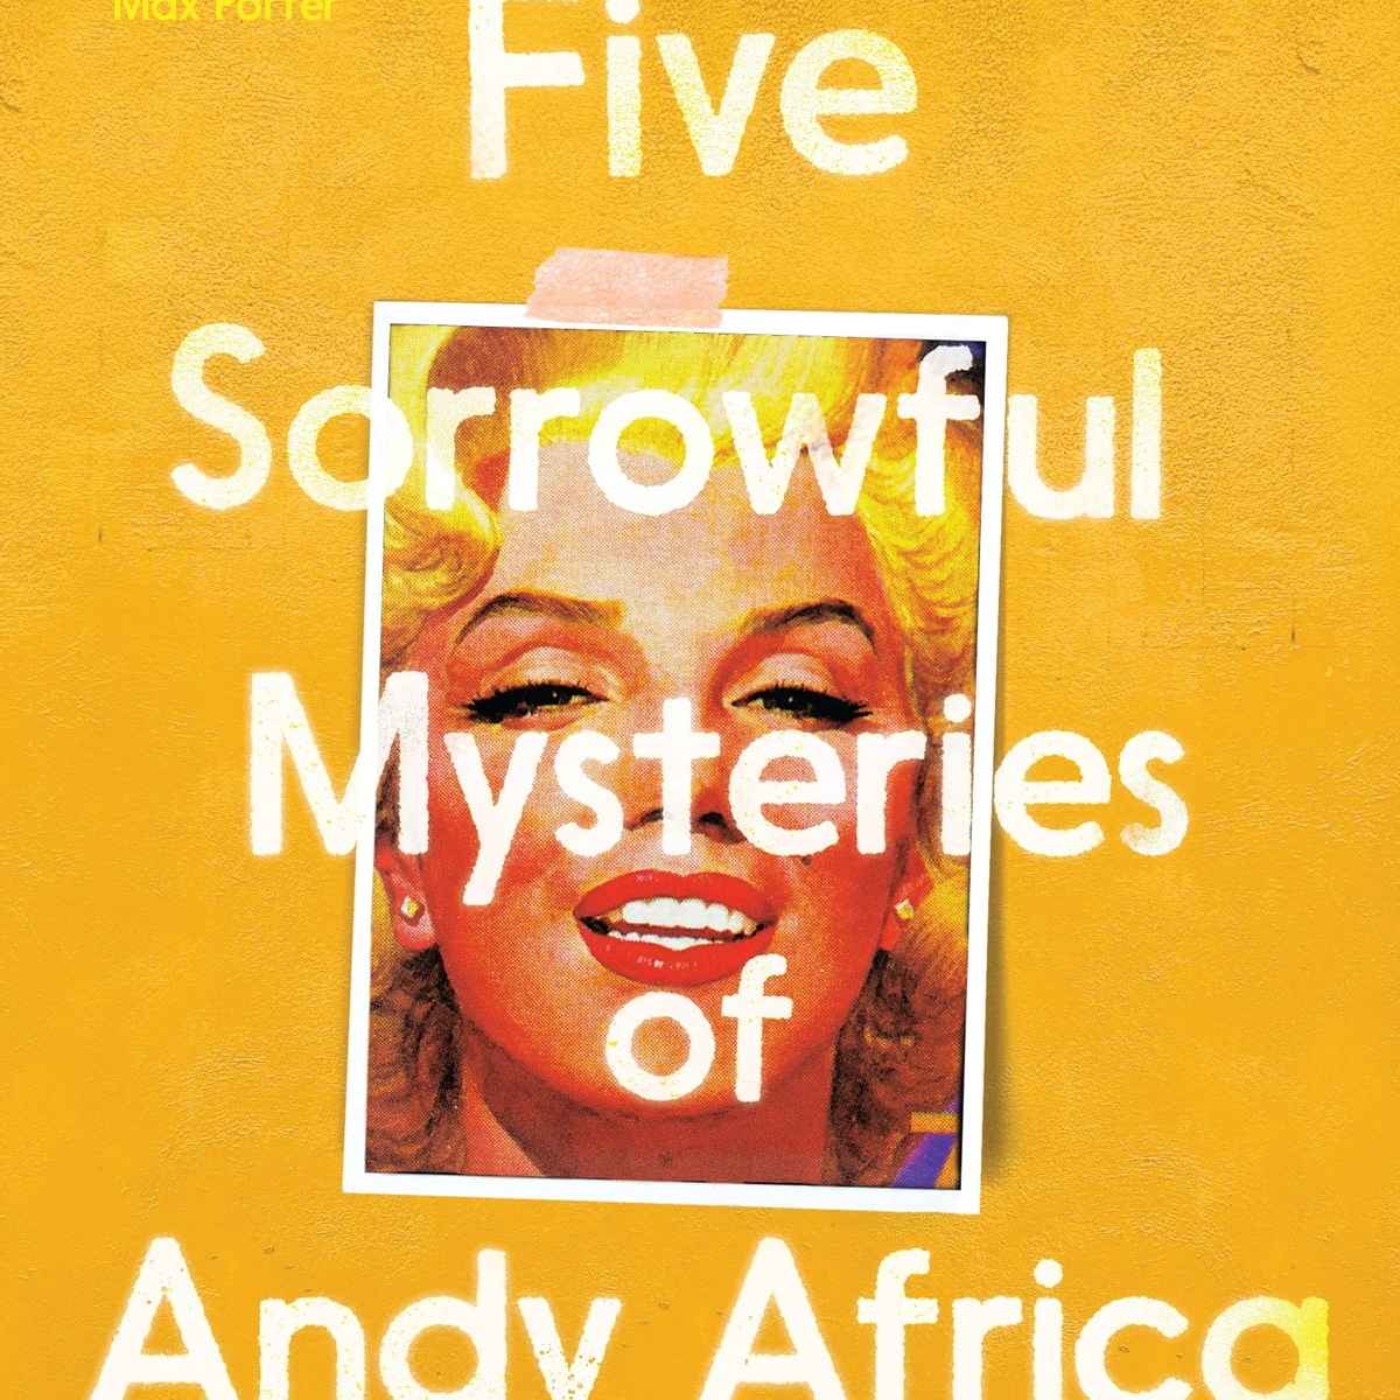 Little Atoms 835 - Stephen Buoro’s The Five Sorrowful Mysteries of Andy Africa